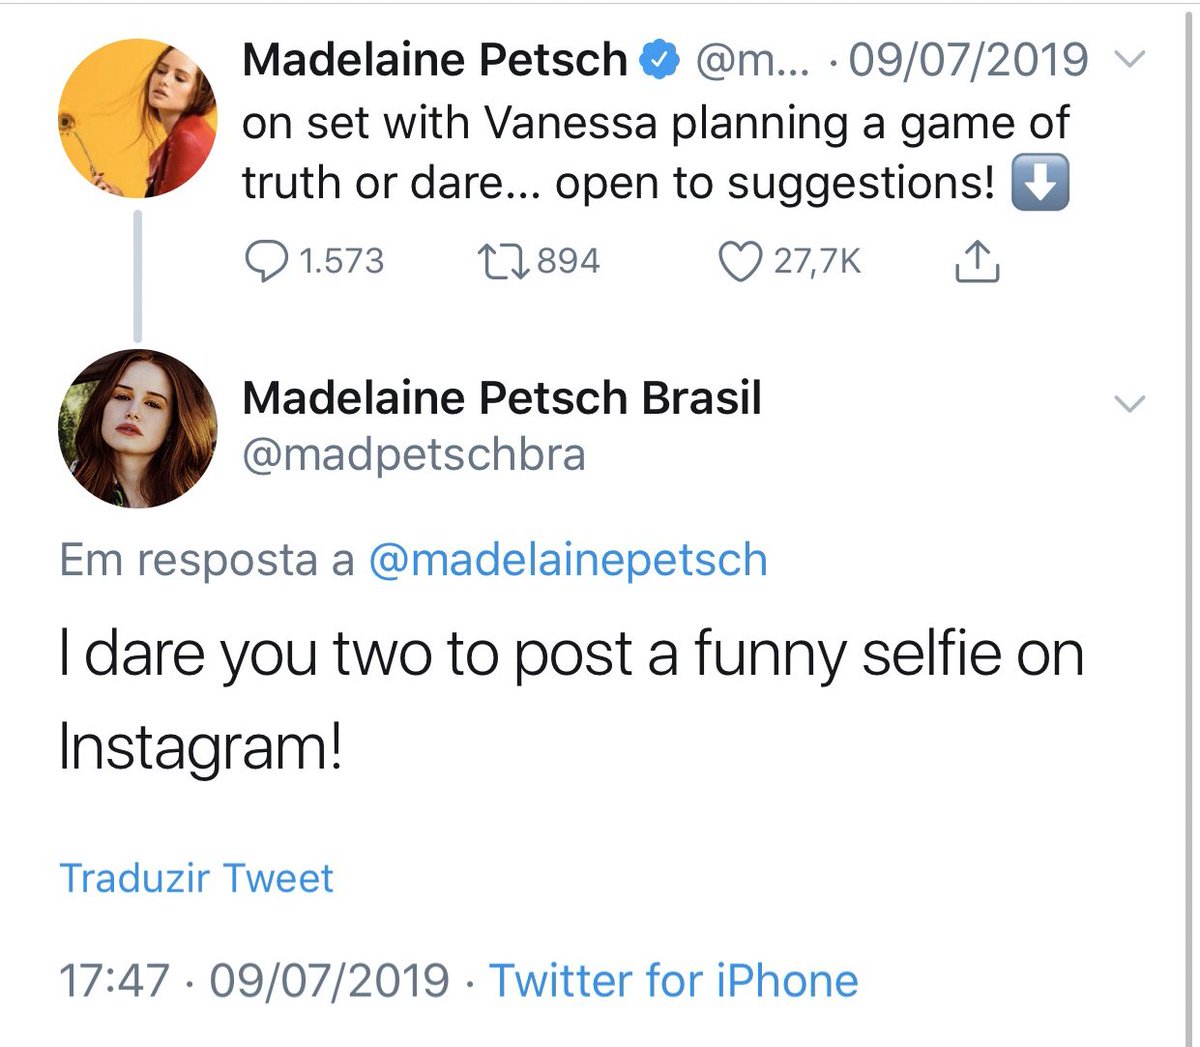 okay so we’re almost done. i also owned madepetschbra with a friend of mine but the account was suspended. i’m the one who asked her to take a ‘funny selfie’ with vanessa (AND SHE DID!). here’s some proof: